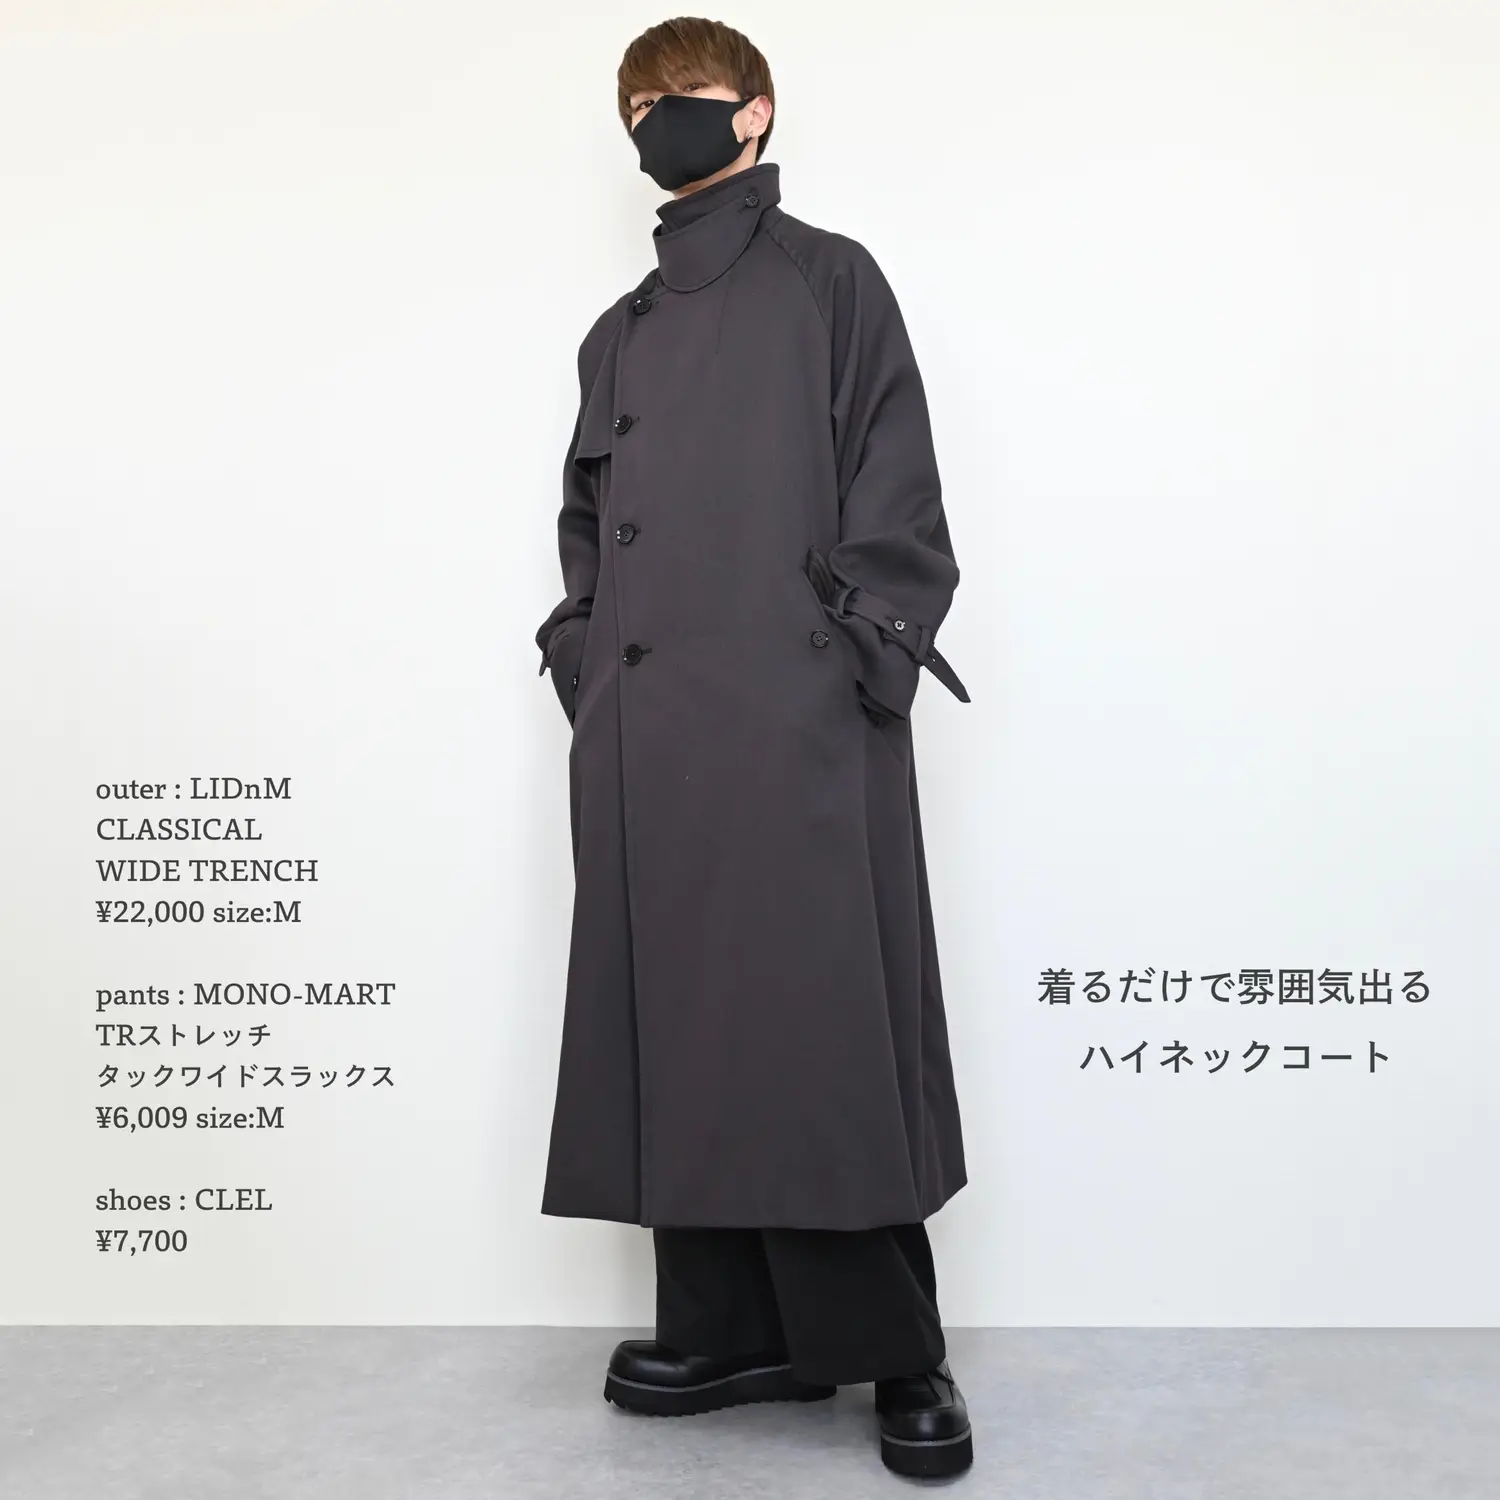 LIDNM 21ss CLASSICAL WIDE TRENCH  Mサイズ